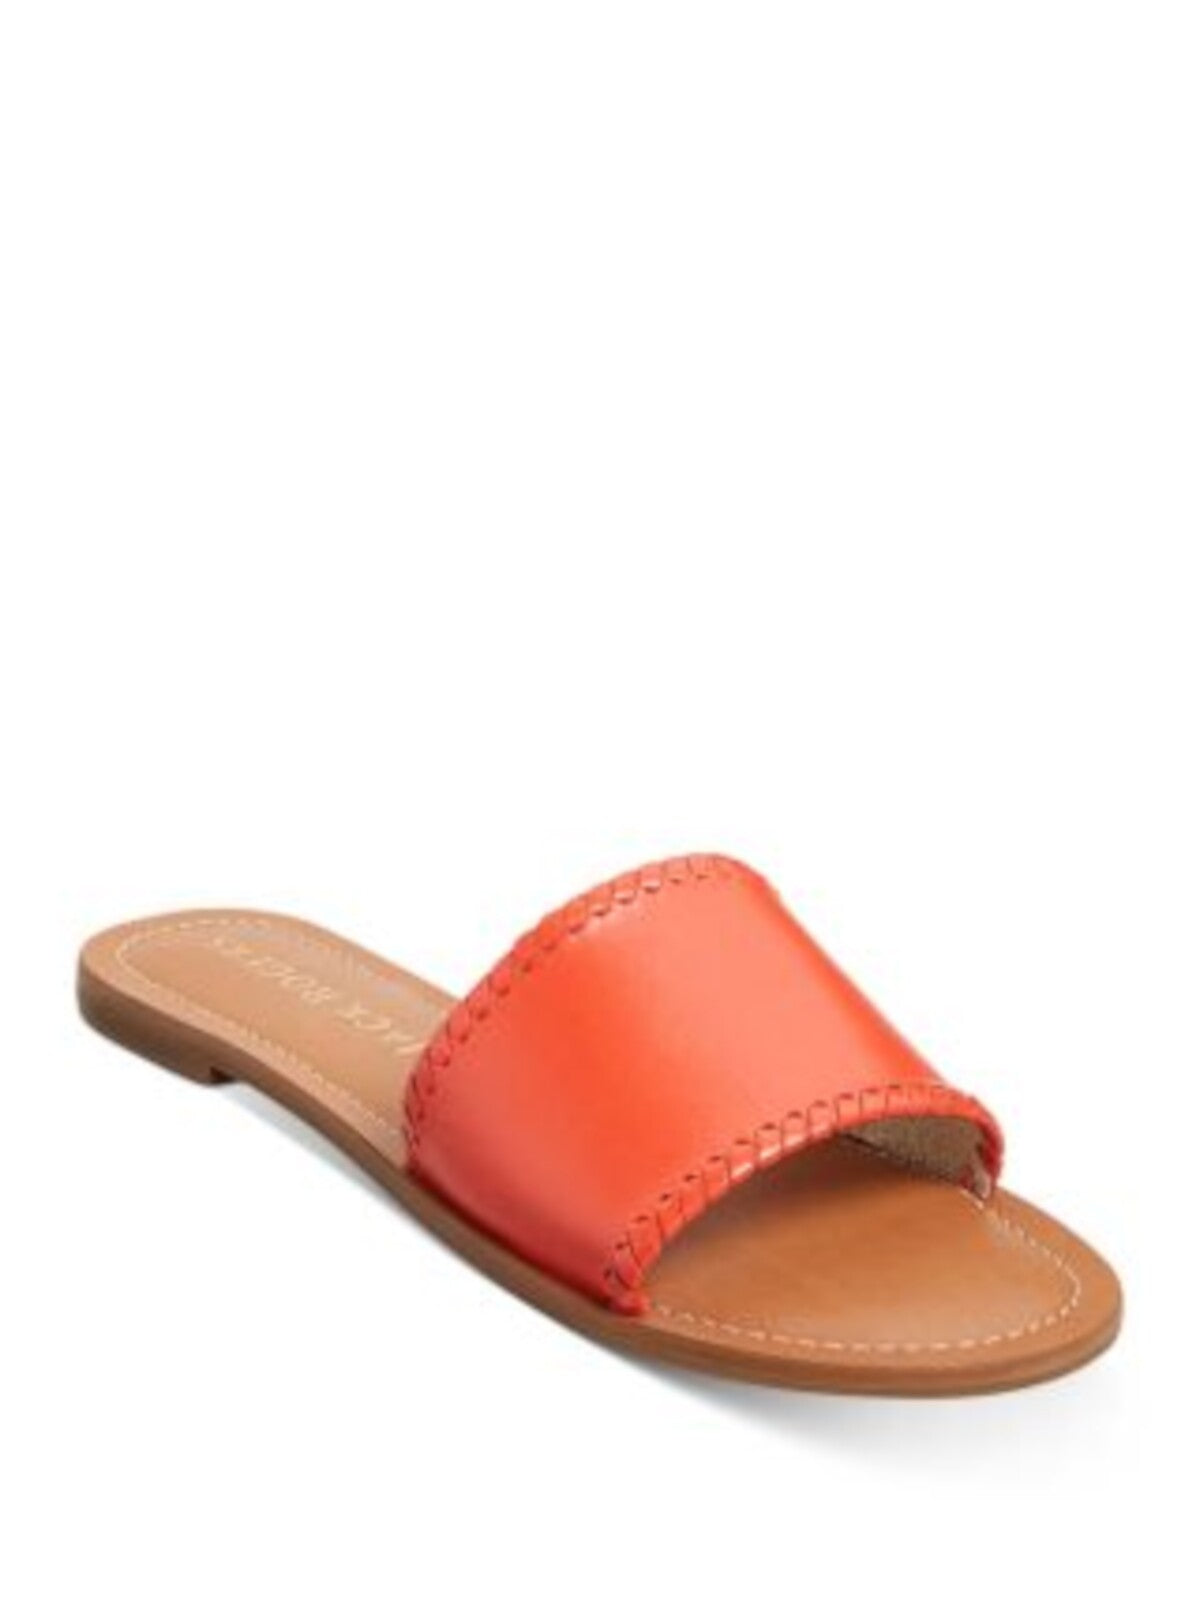 JACK ROGERS Womens Coral Whipstitch Detailing Padded Sofia Round Toe Slip On Leather Slide Sandals 8.5 M